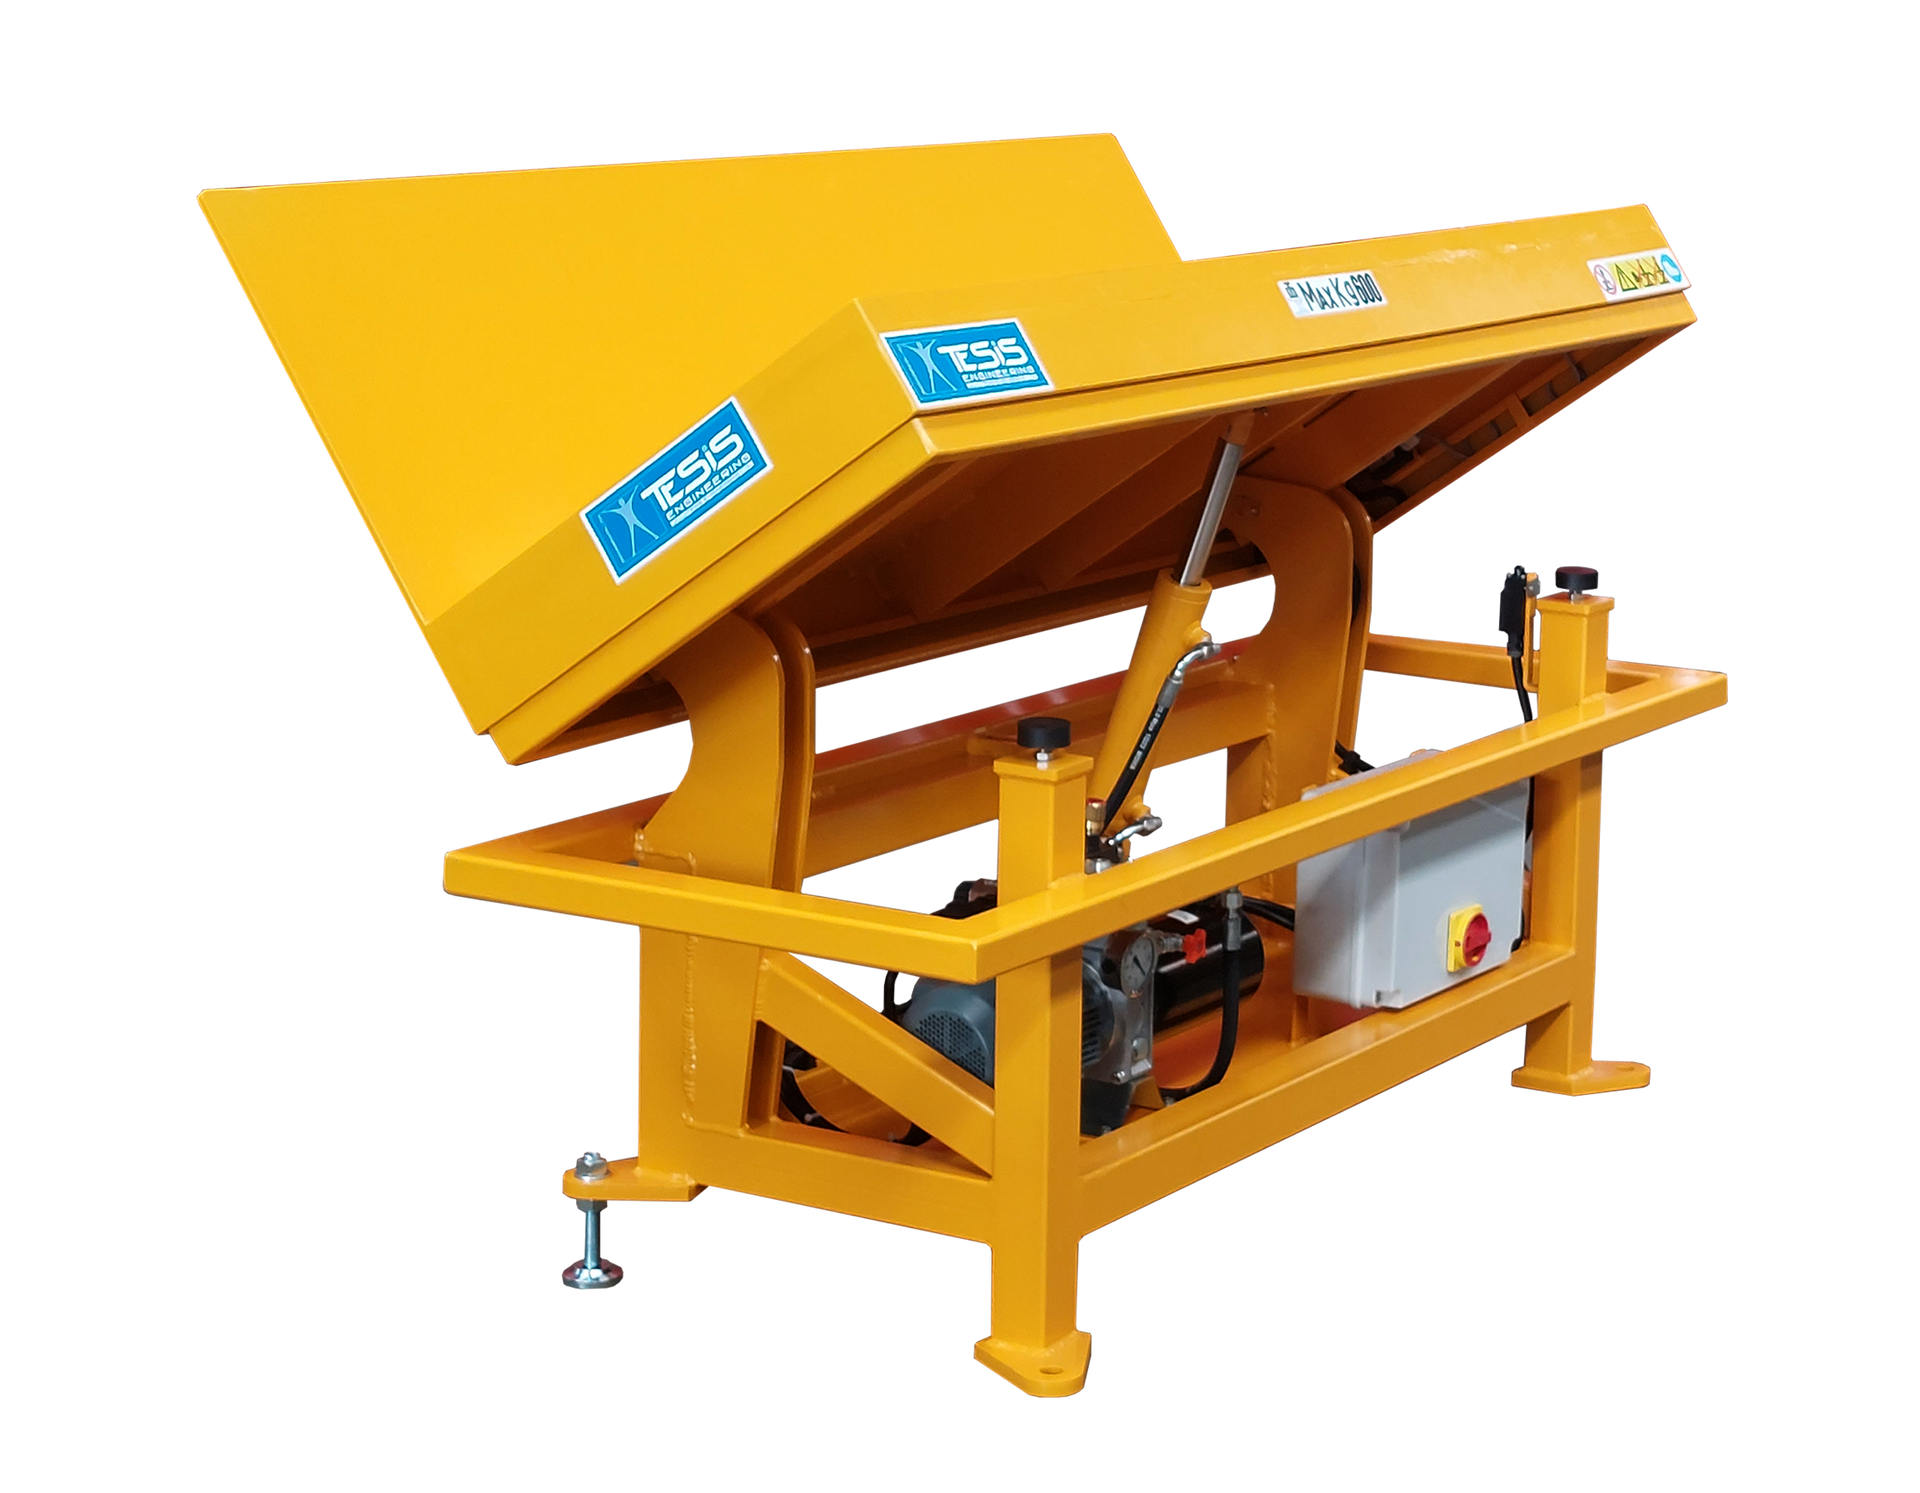 Tilting table for assembly line, tilt table, tipper for containers